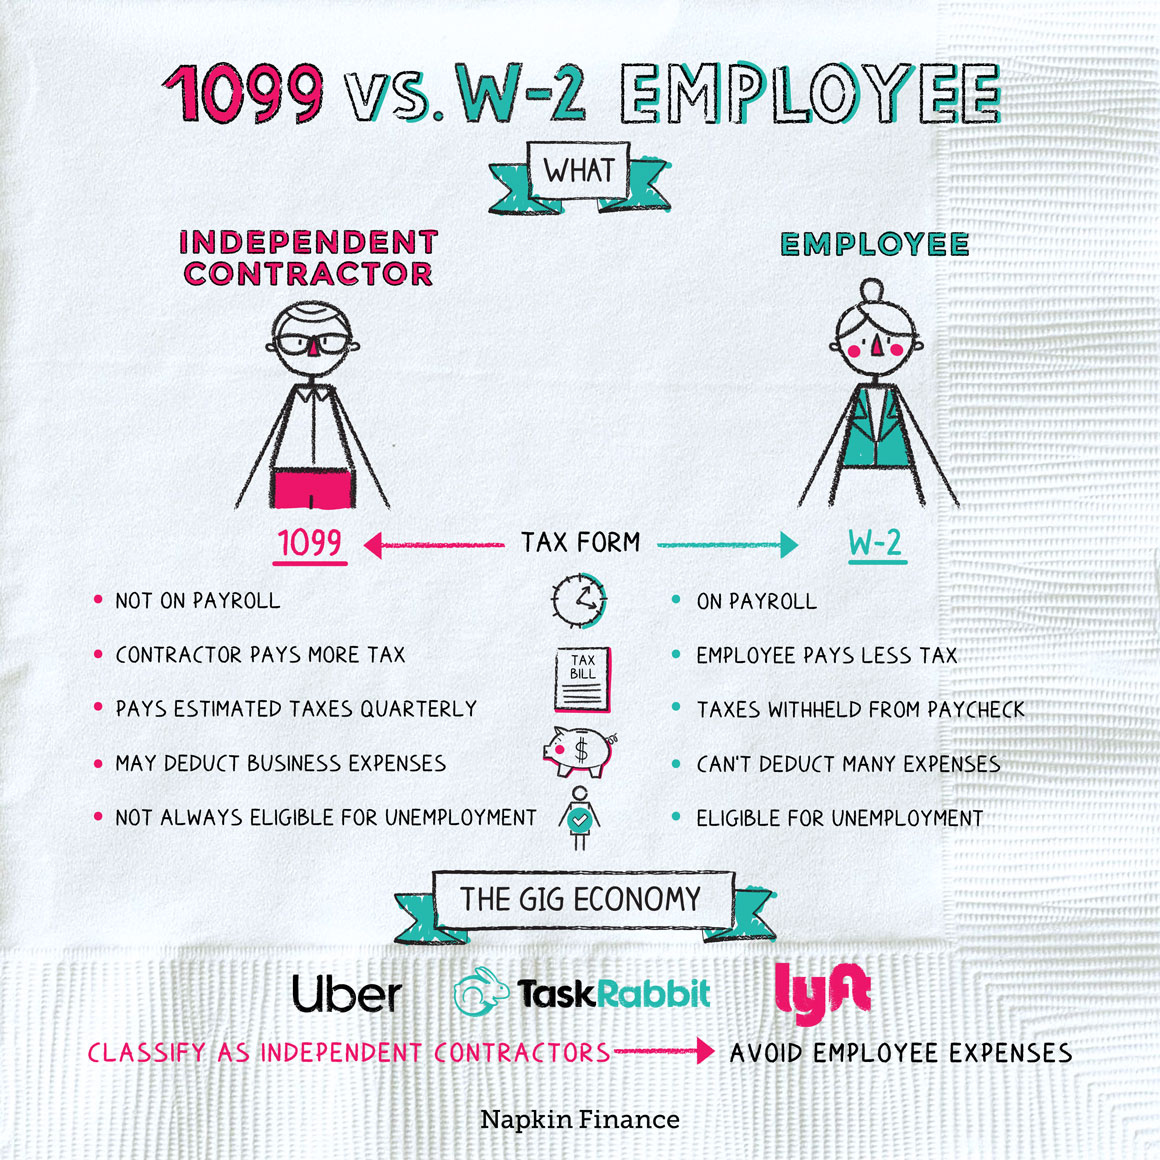 What Is A 1099 Vs W-2 Employee? – Napkin Finance pertaining to Is 1099 Form Same As W2